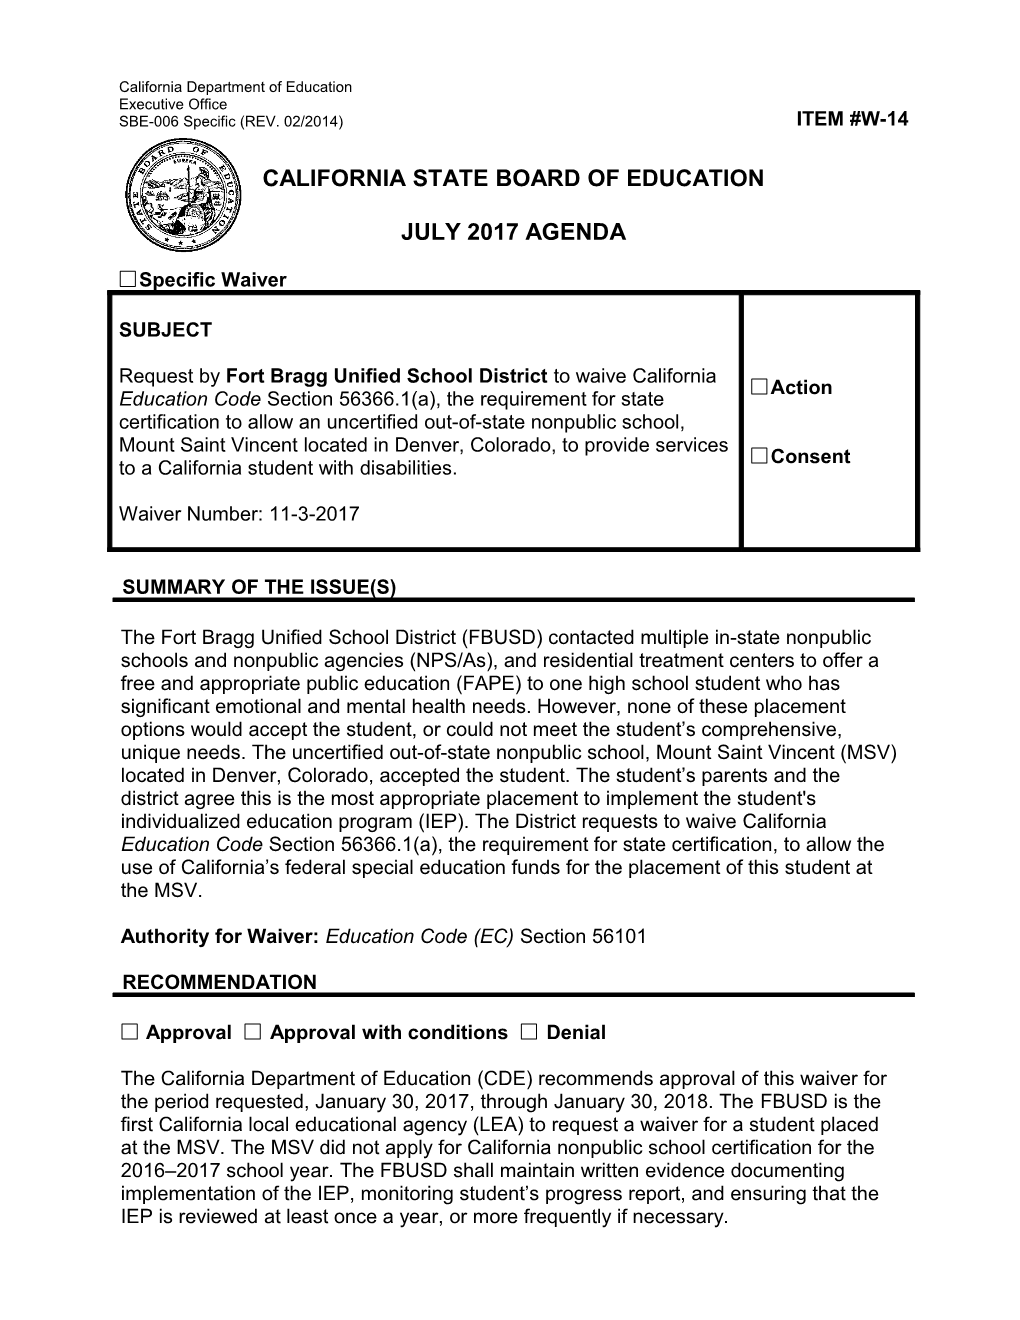 July 2017 Waiver Item W-14 - Meeting Agendas (CA State Board of Education)